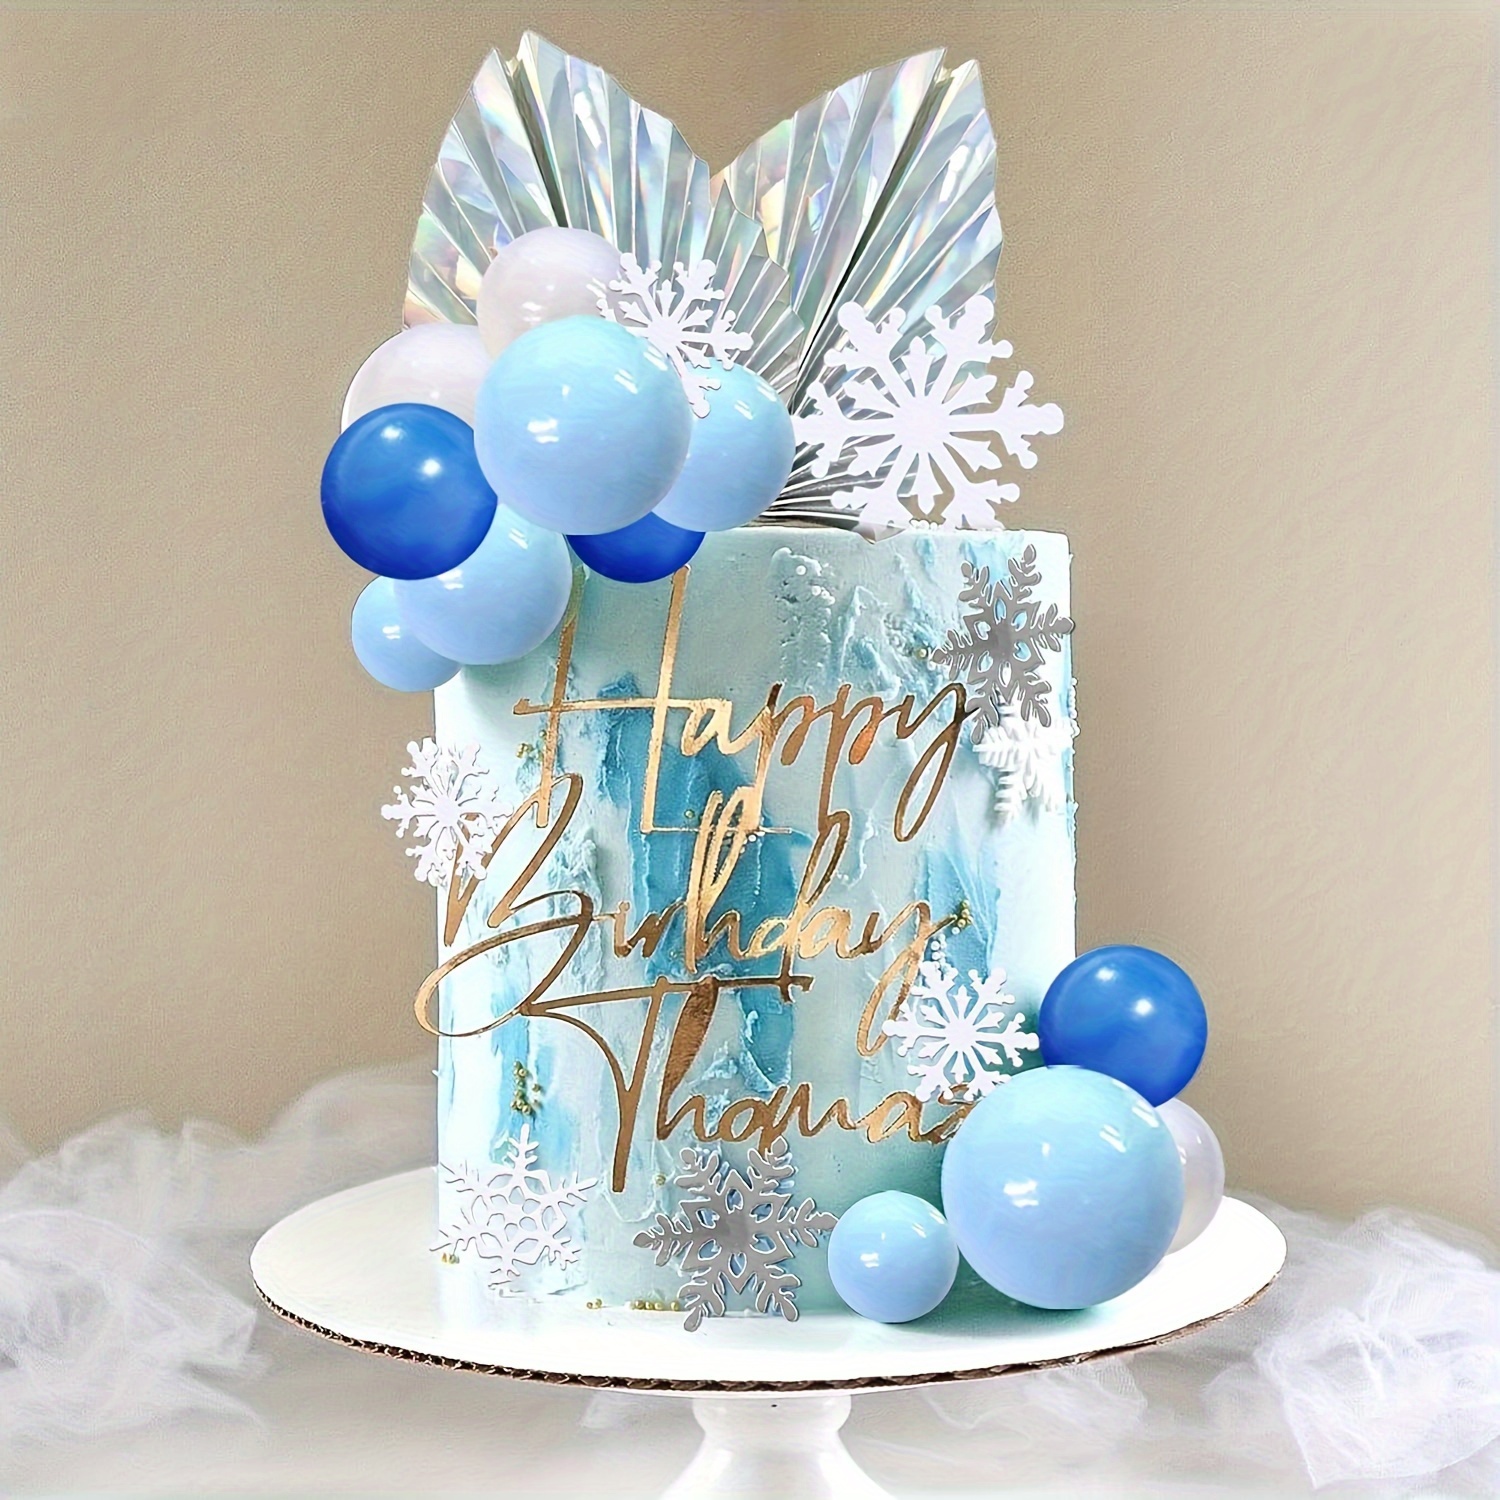 

44pcs, Snowflake Cake Toppers Cake Toppers Blue Ball Cake Toppers Wedding Decoration Supplies For Winter Theme Birthday Party (snowflake)